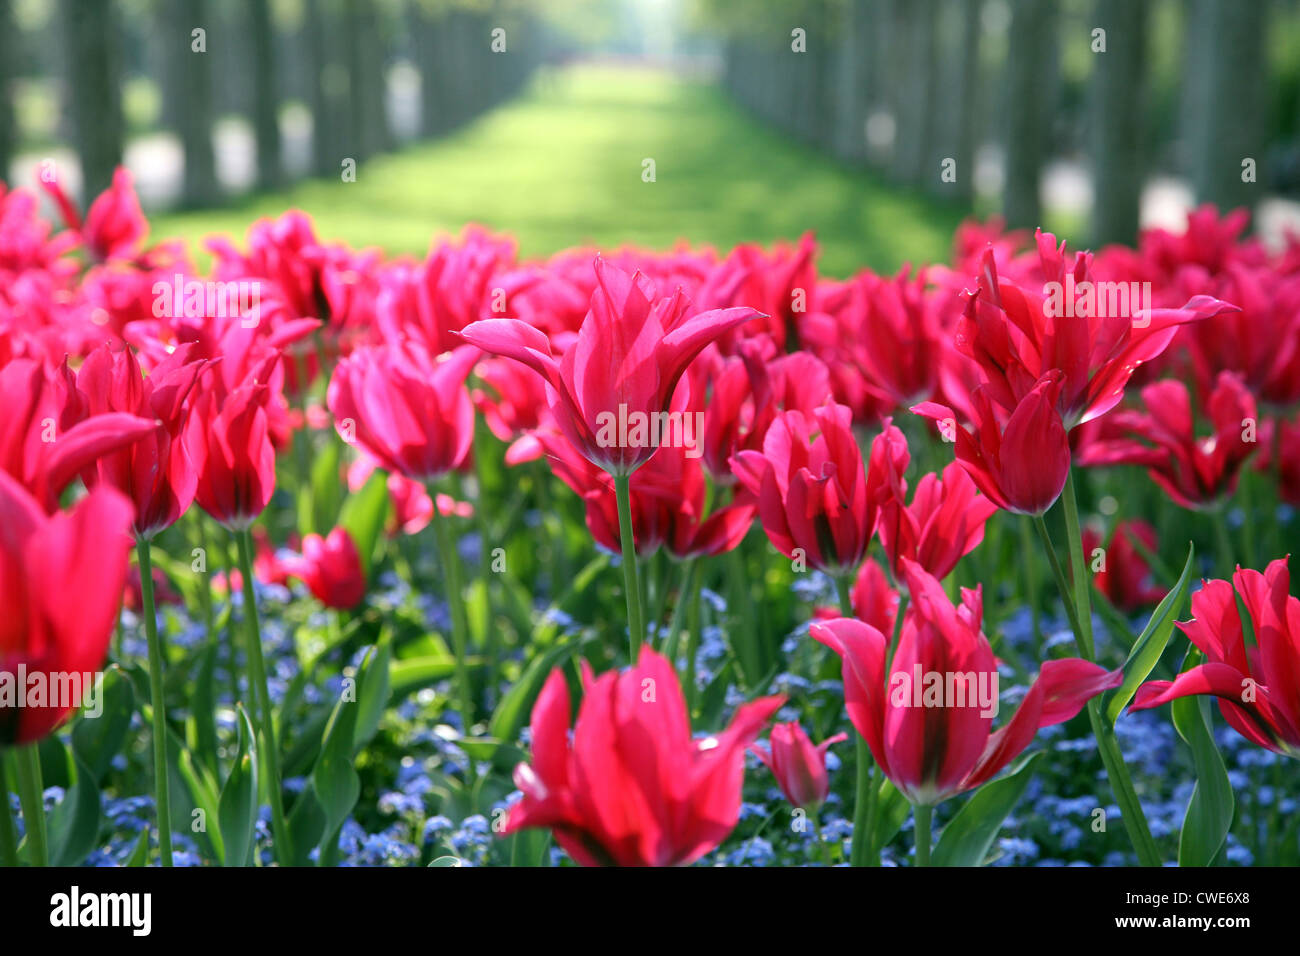 Tulips in the park Stock Photo